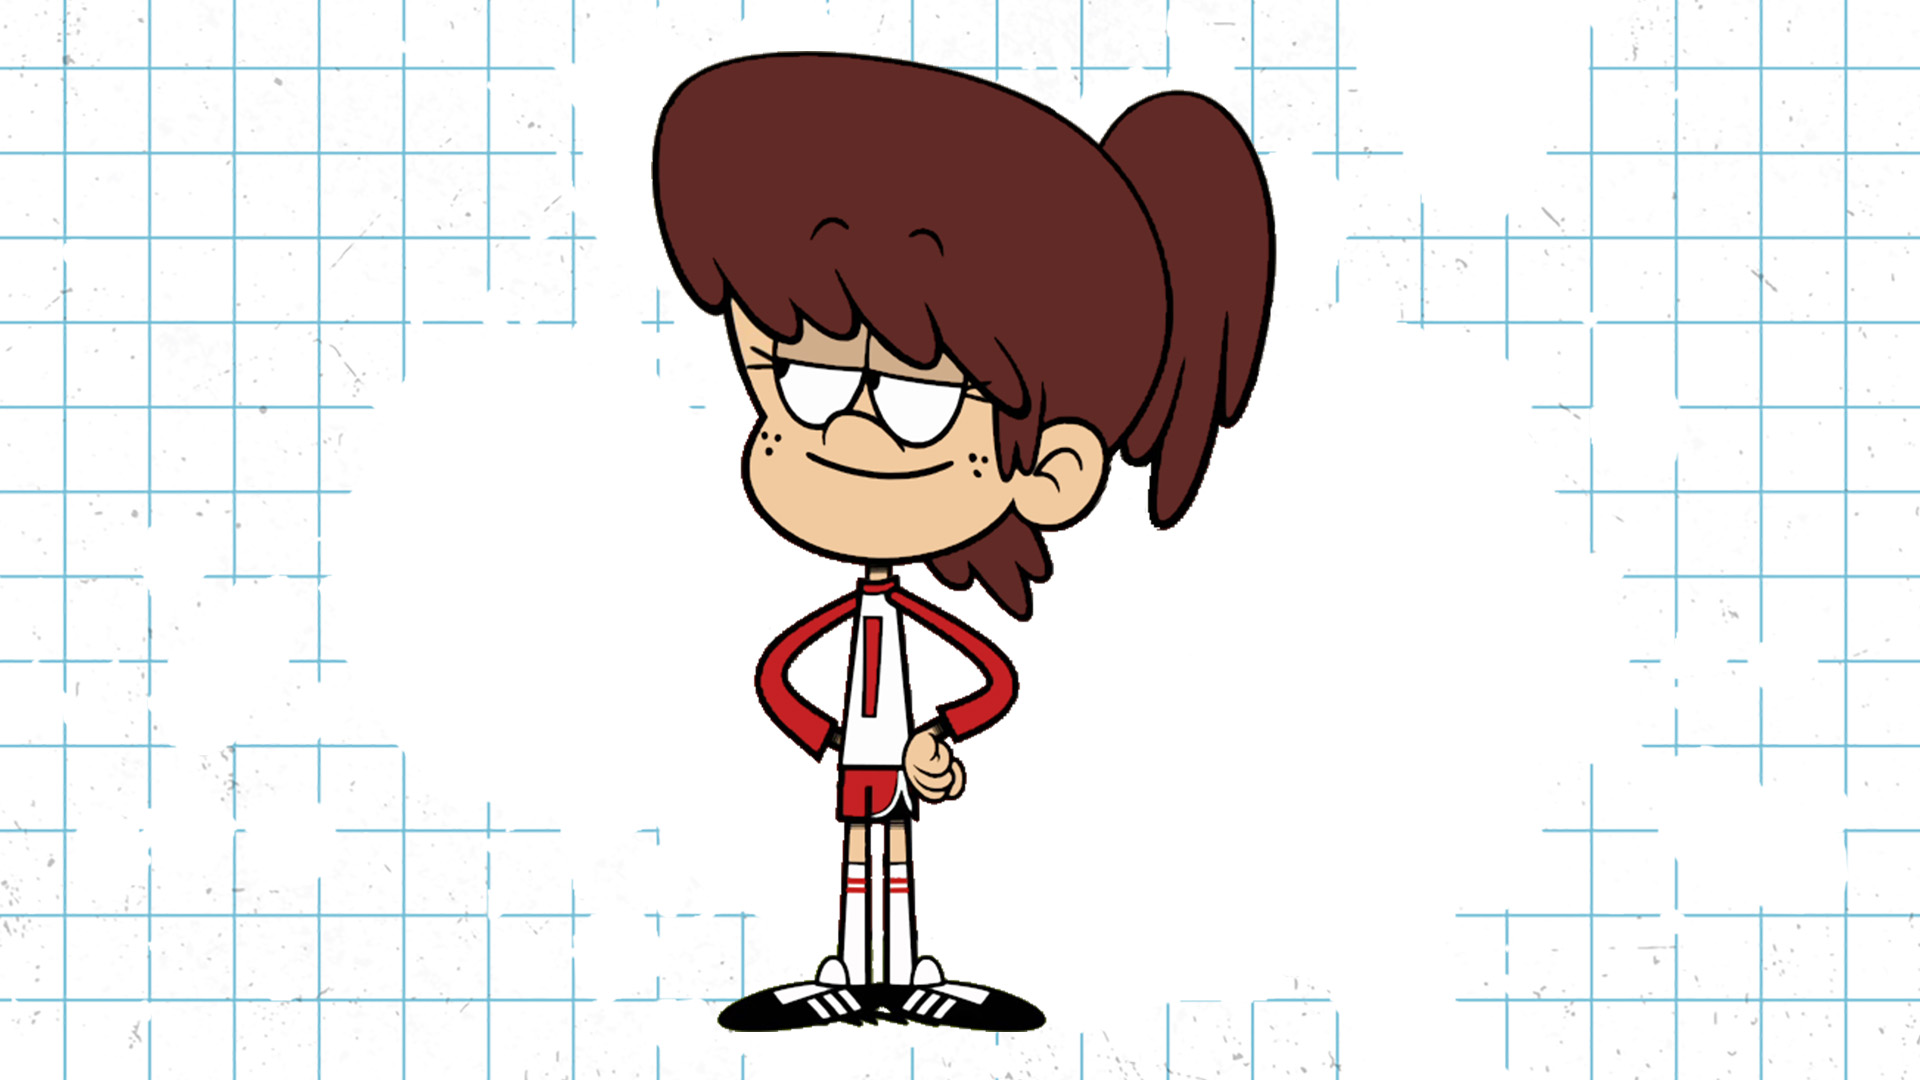 A Loud House character with dark brown hair and baseball clothes